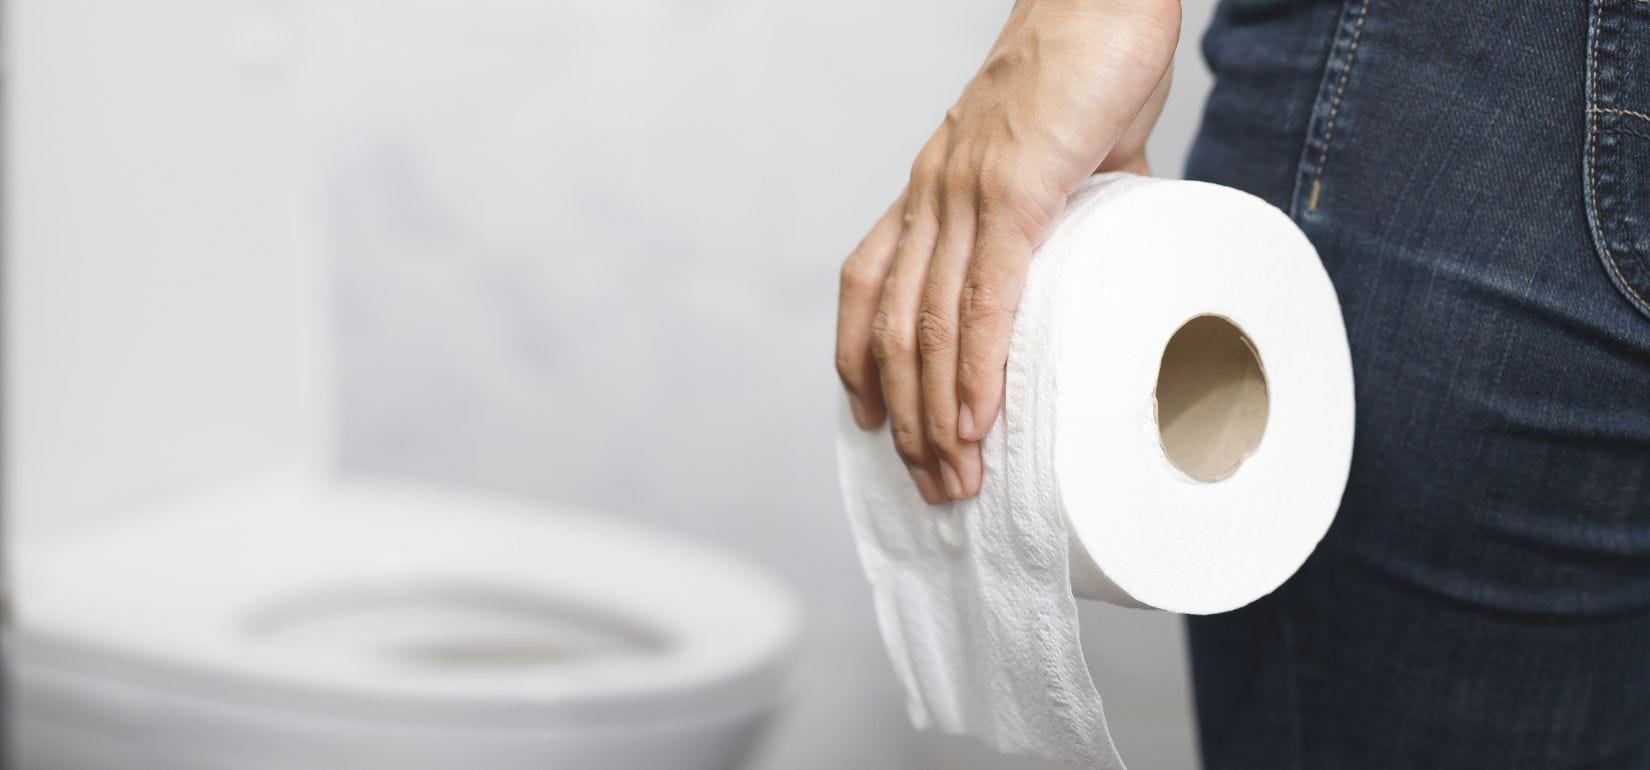 person holding toilet paper roll